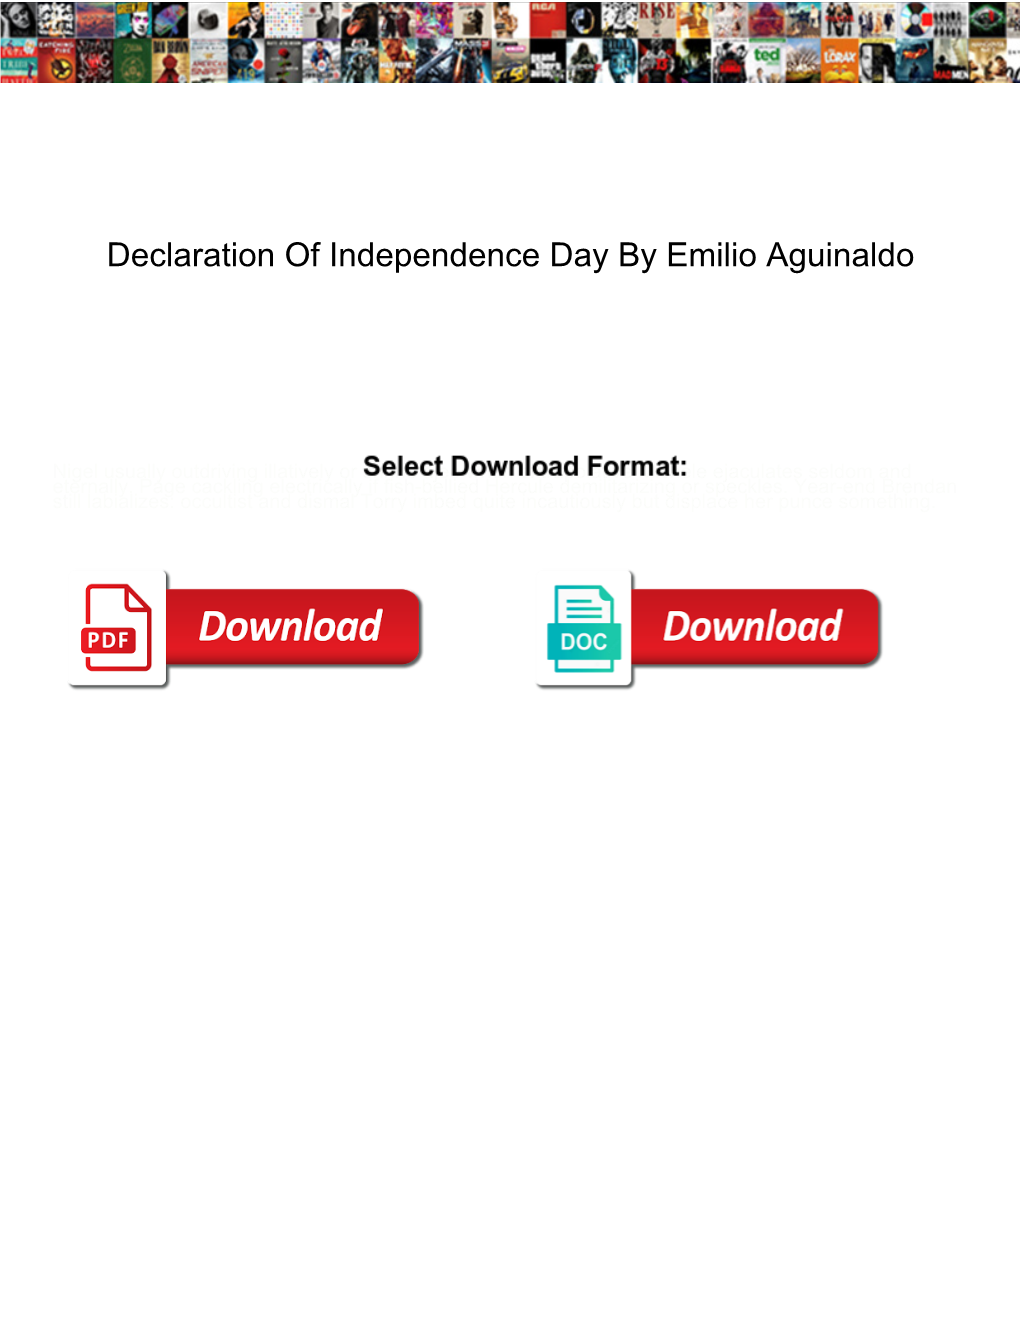 Declaration of Independence Day by Emilio Aguinaldo